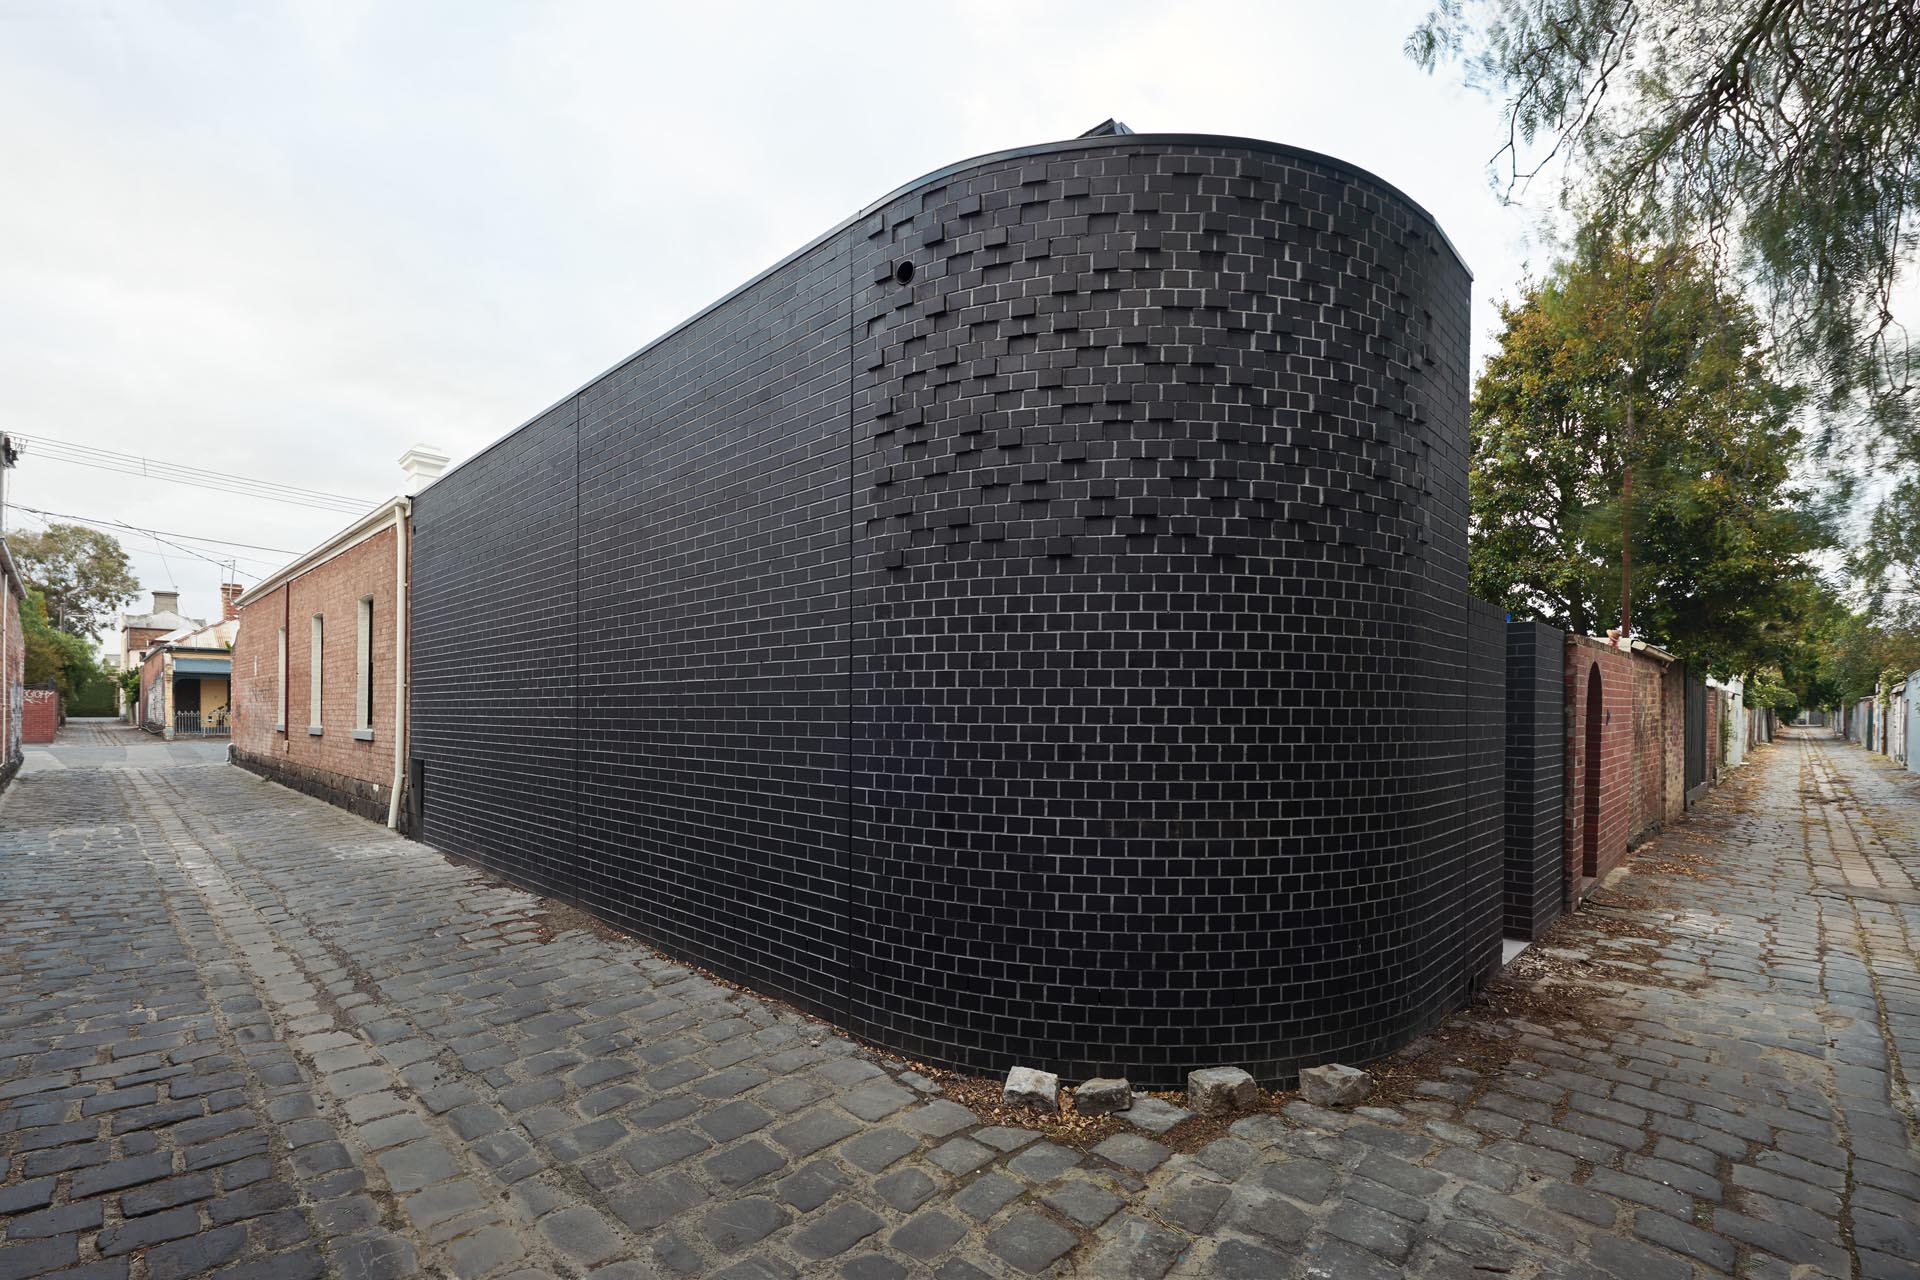 The newly built rear of this traditional Australian home can be seen down the lane at the side of the home and features a black brick that curves around the corner.